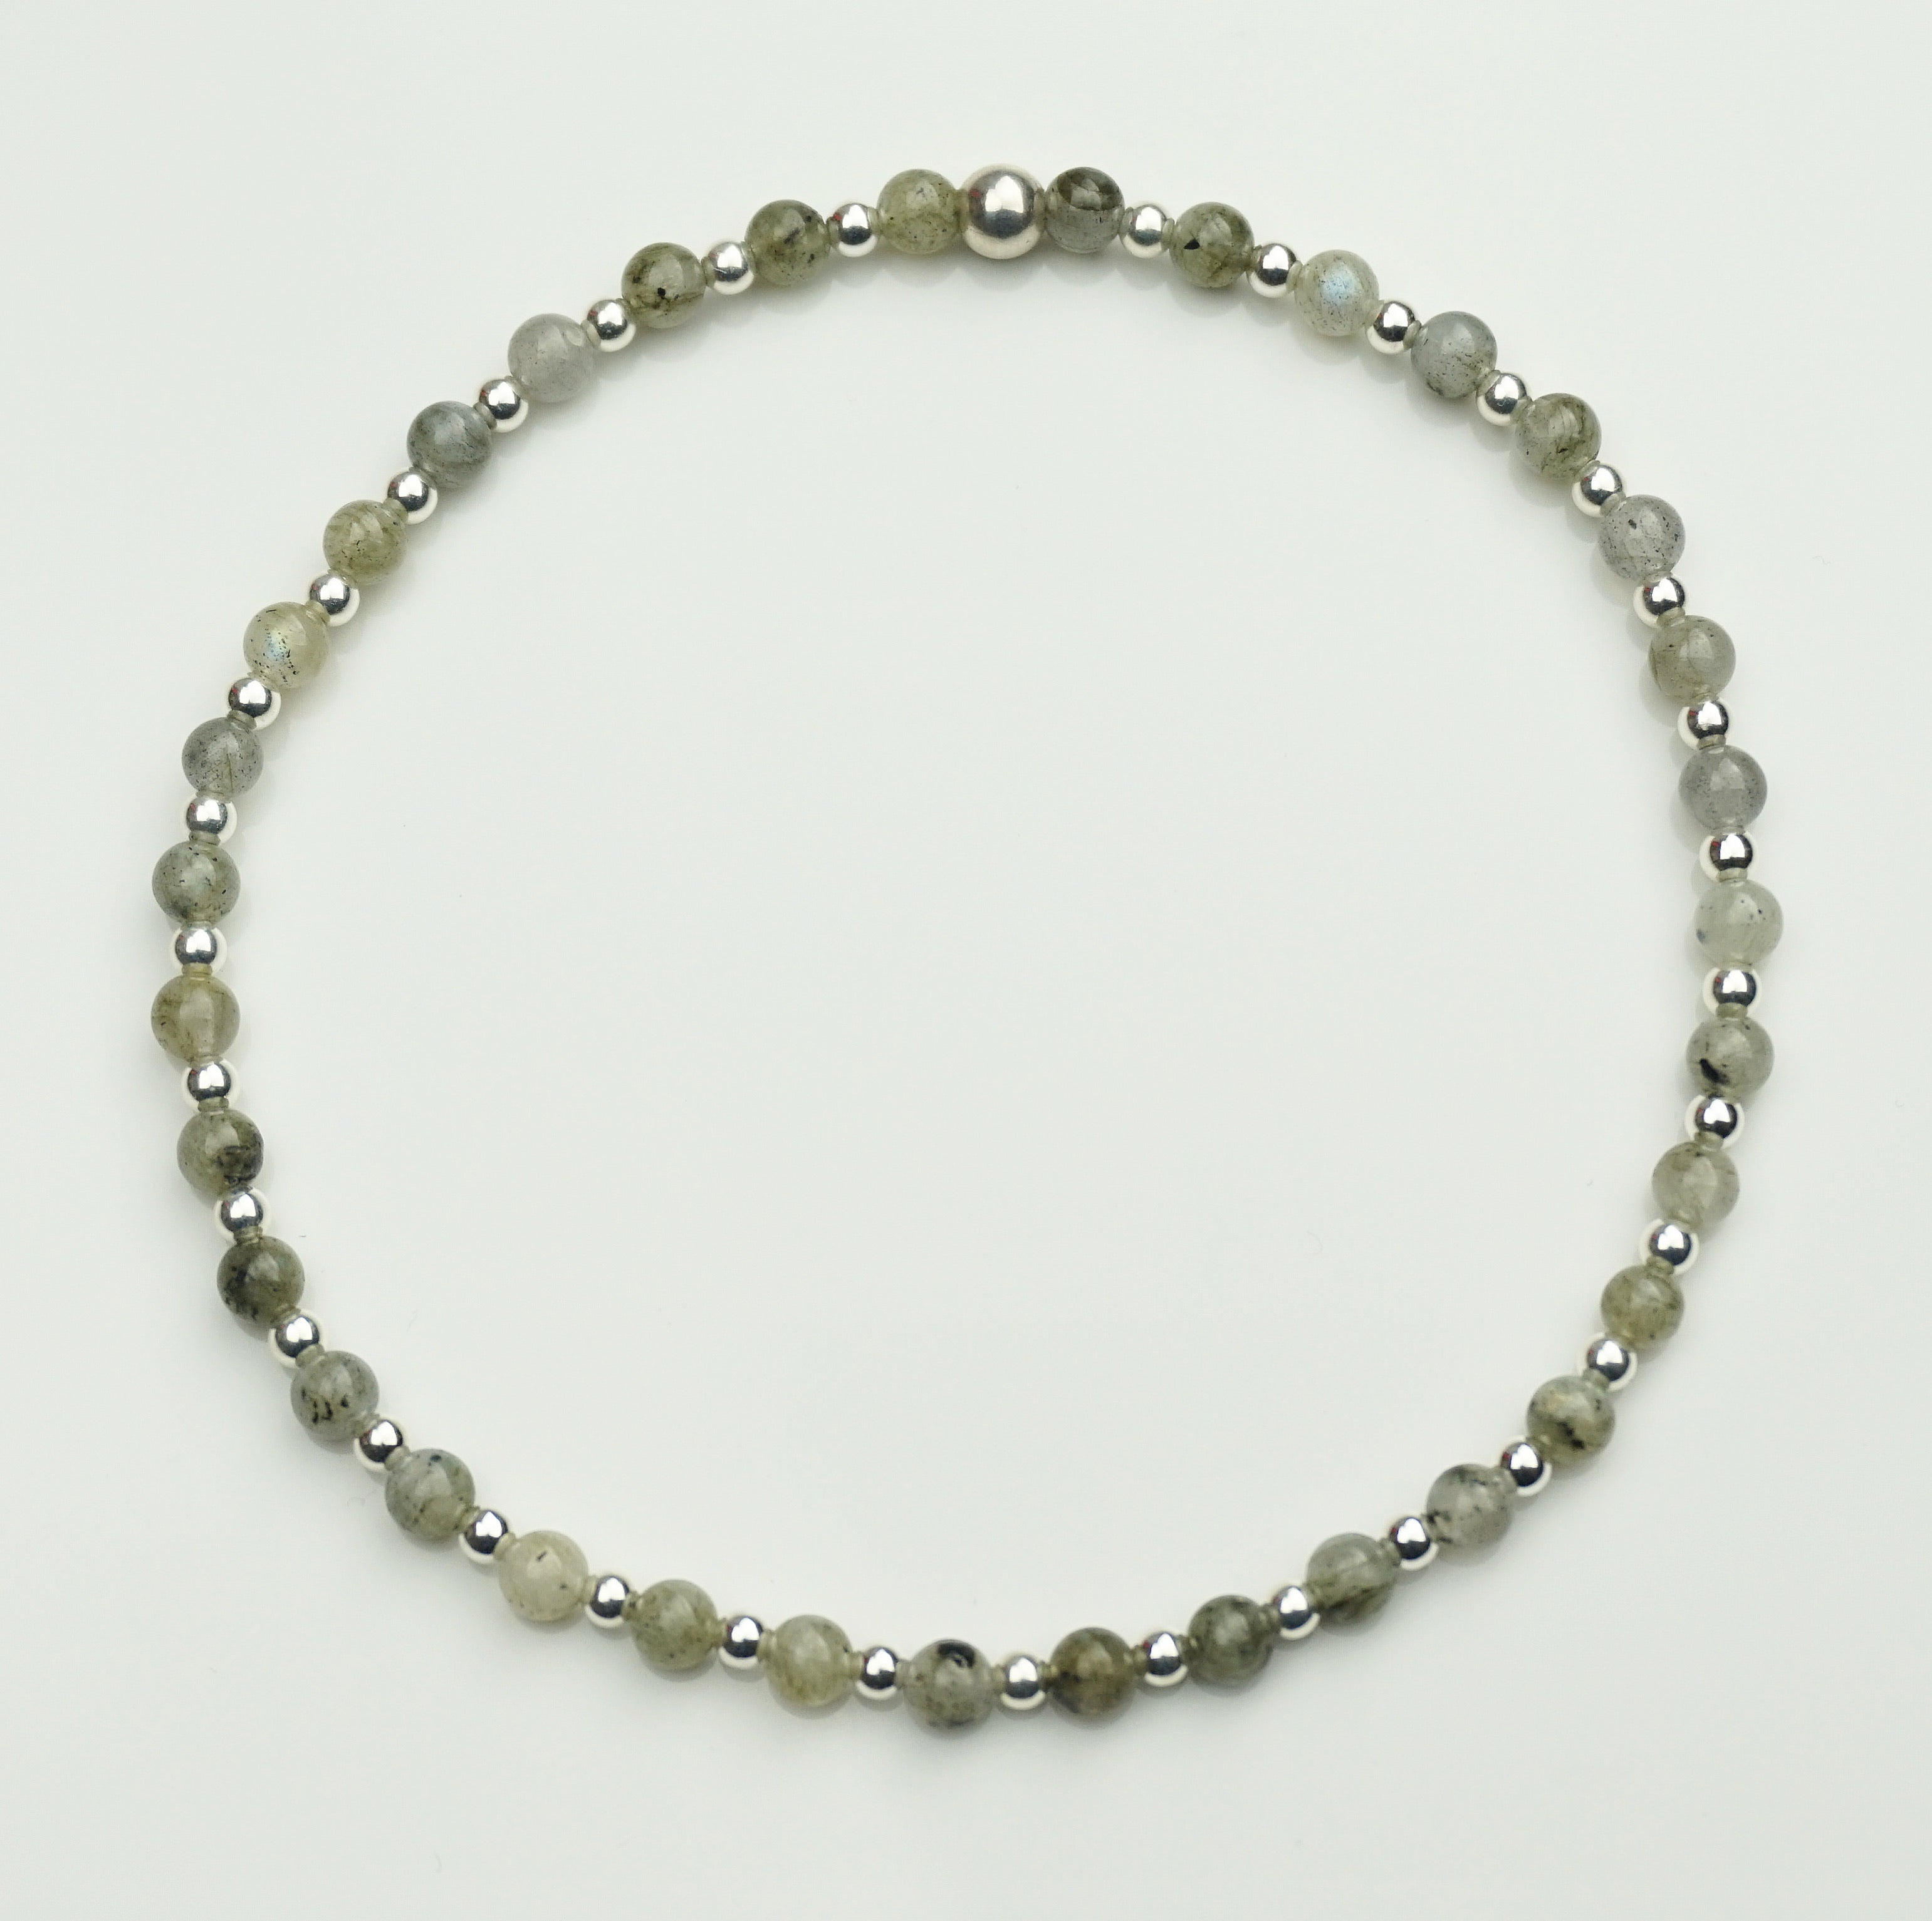 Anklet – Labradorite and Sterling Silver